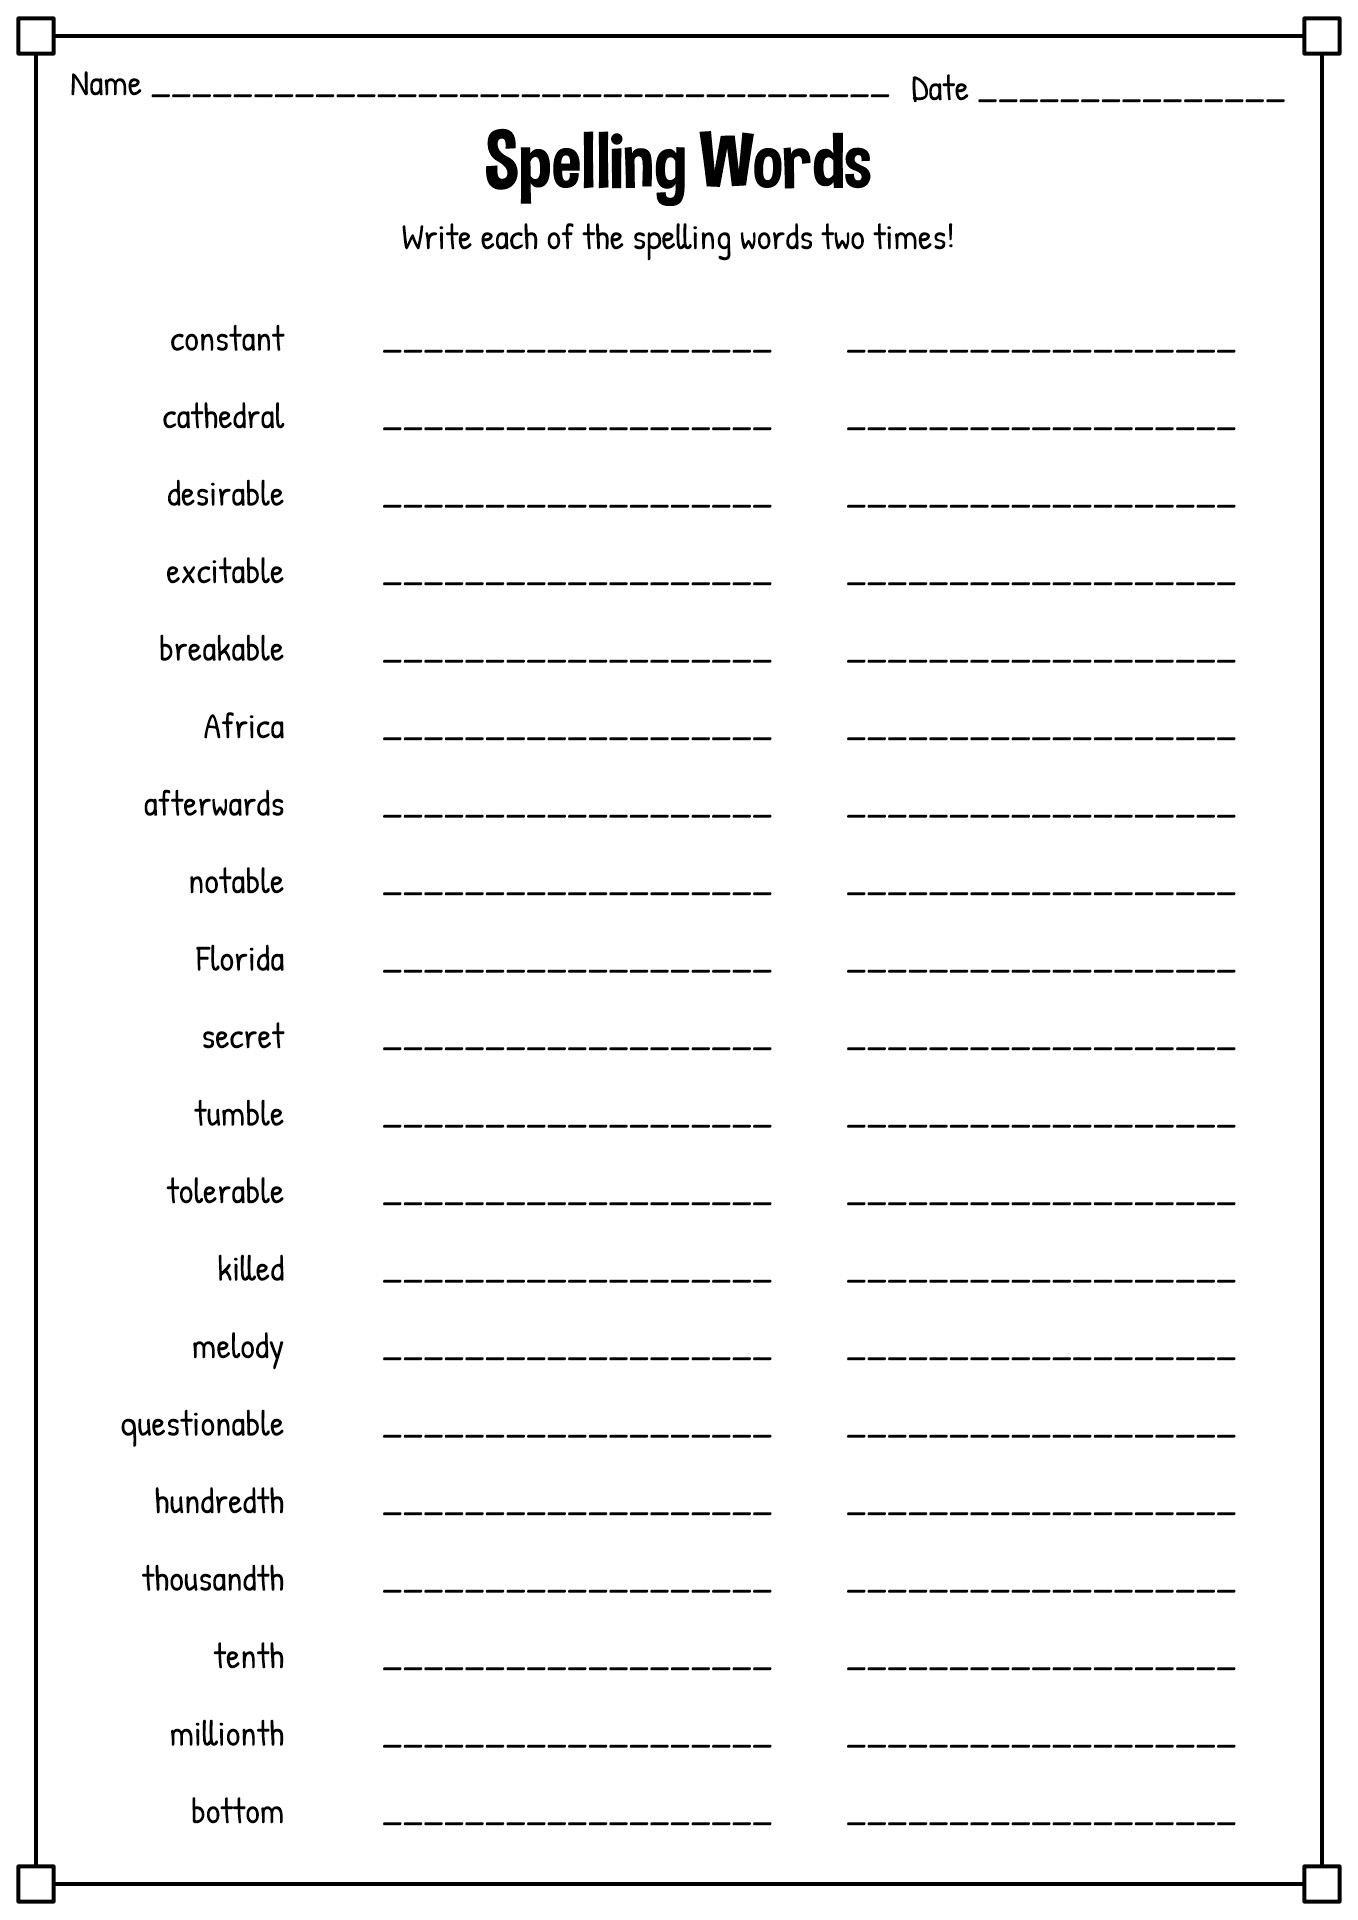 free-printable-spelling-worksheets-for-adults-printable-templates